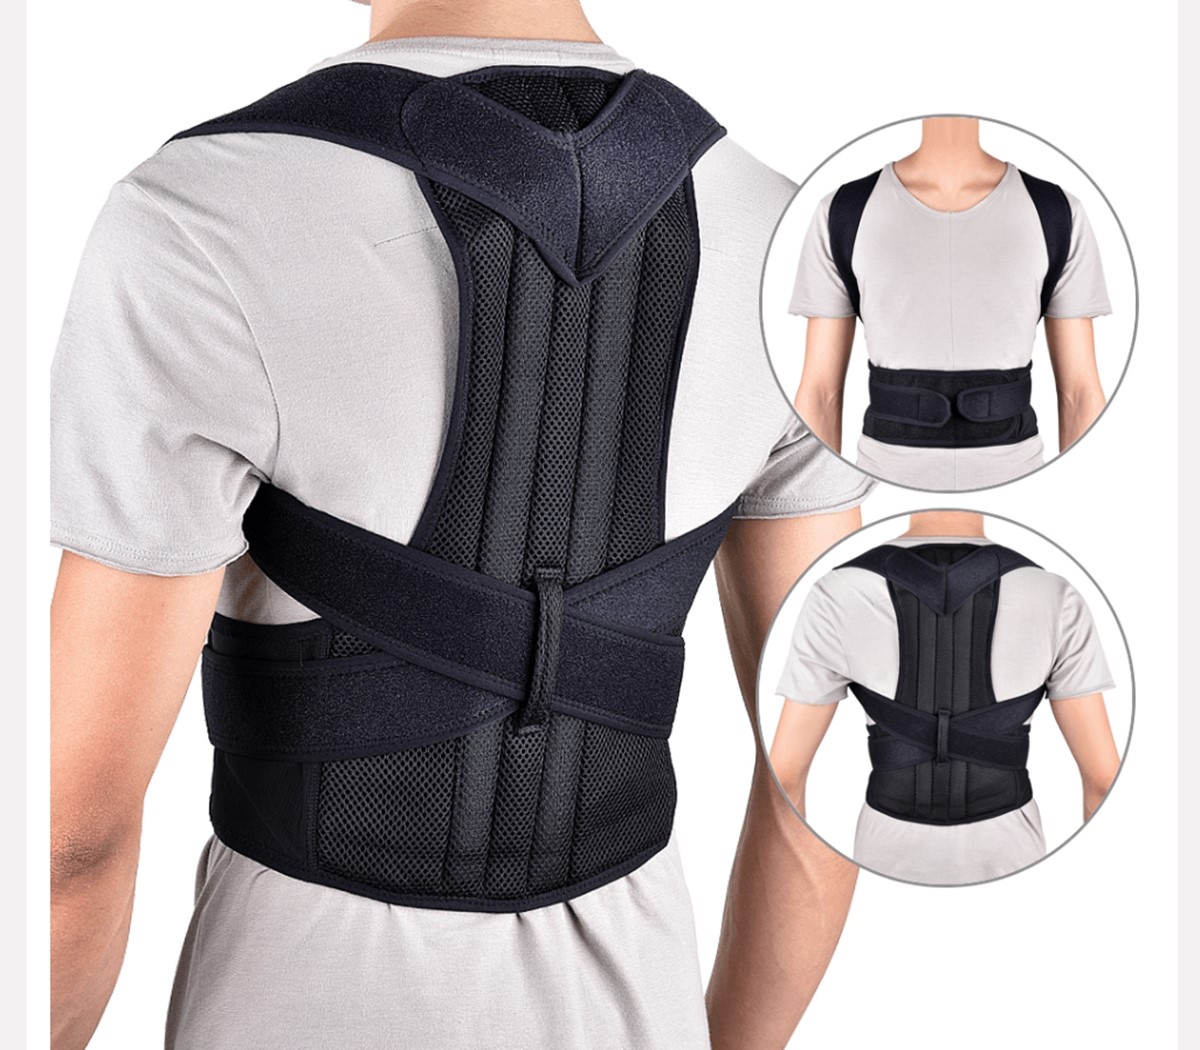 Best dropshipping lifestyle products: Posture Corrector